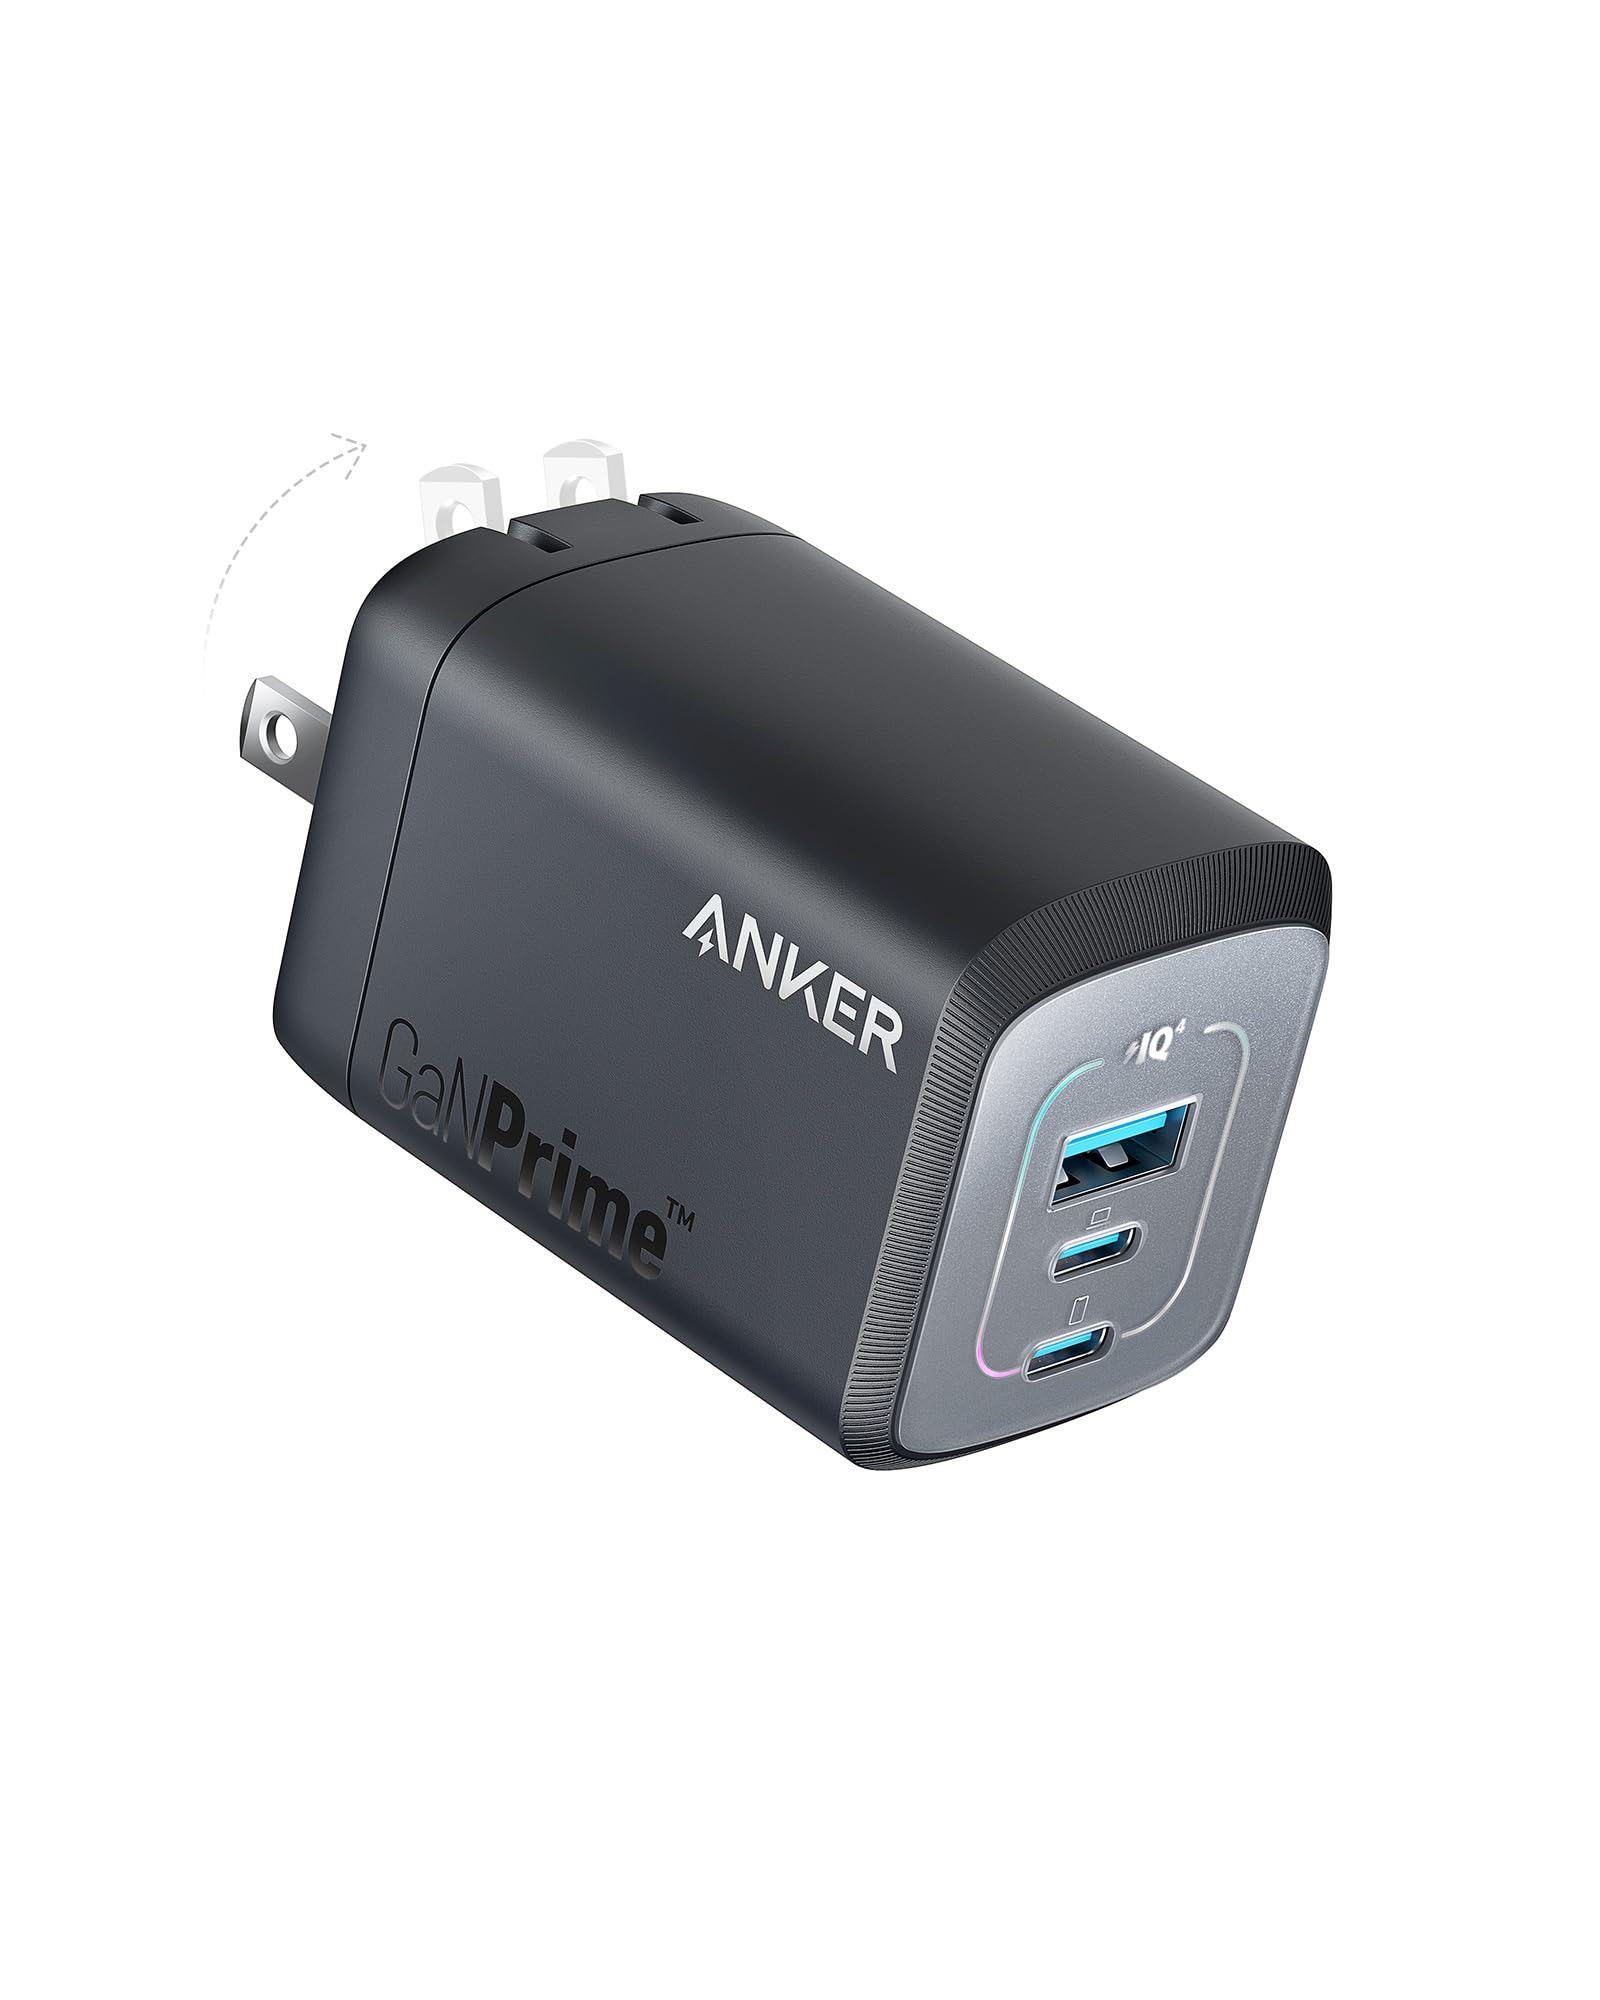 Anker Prime 100W USB C GaN Compact 3 Ports Charger, $60